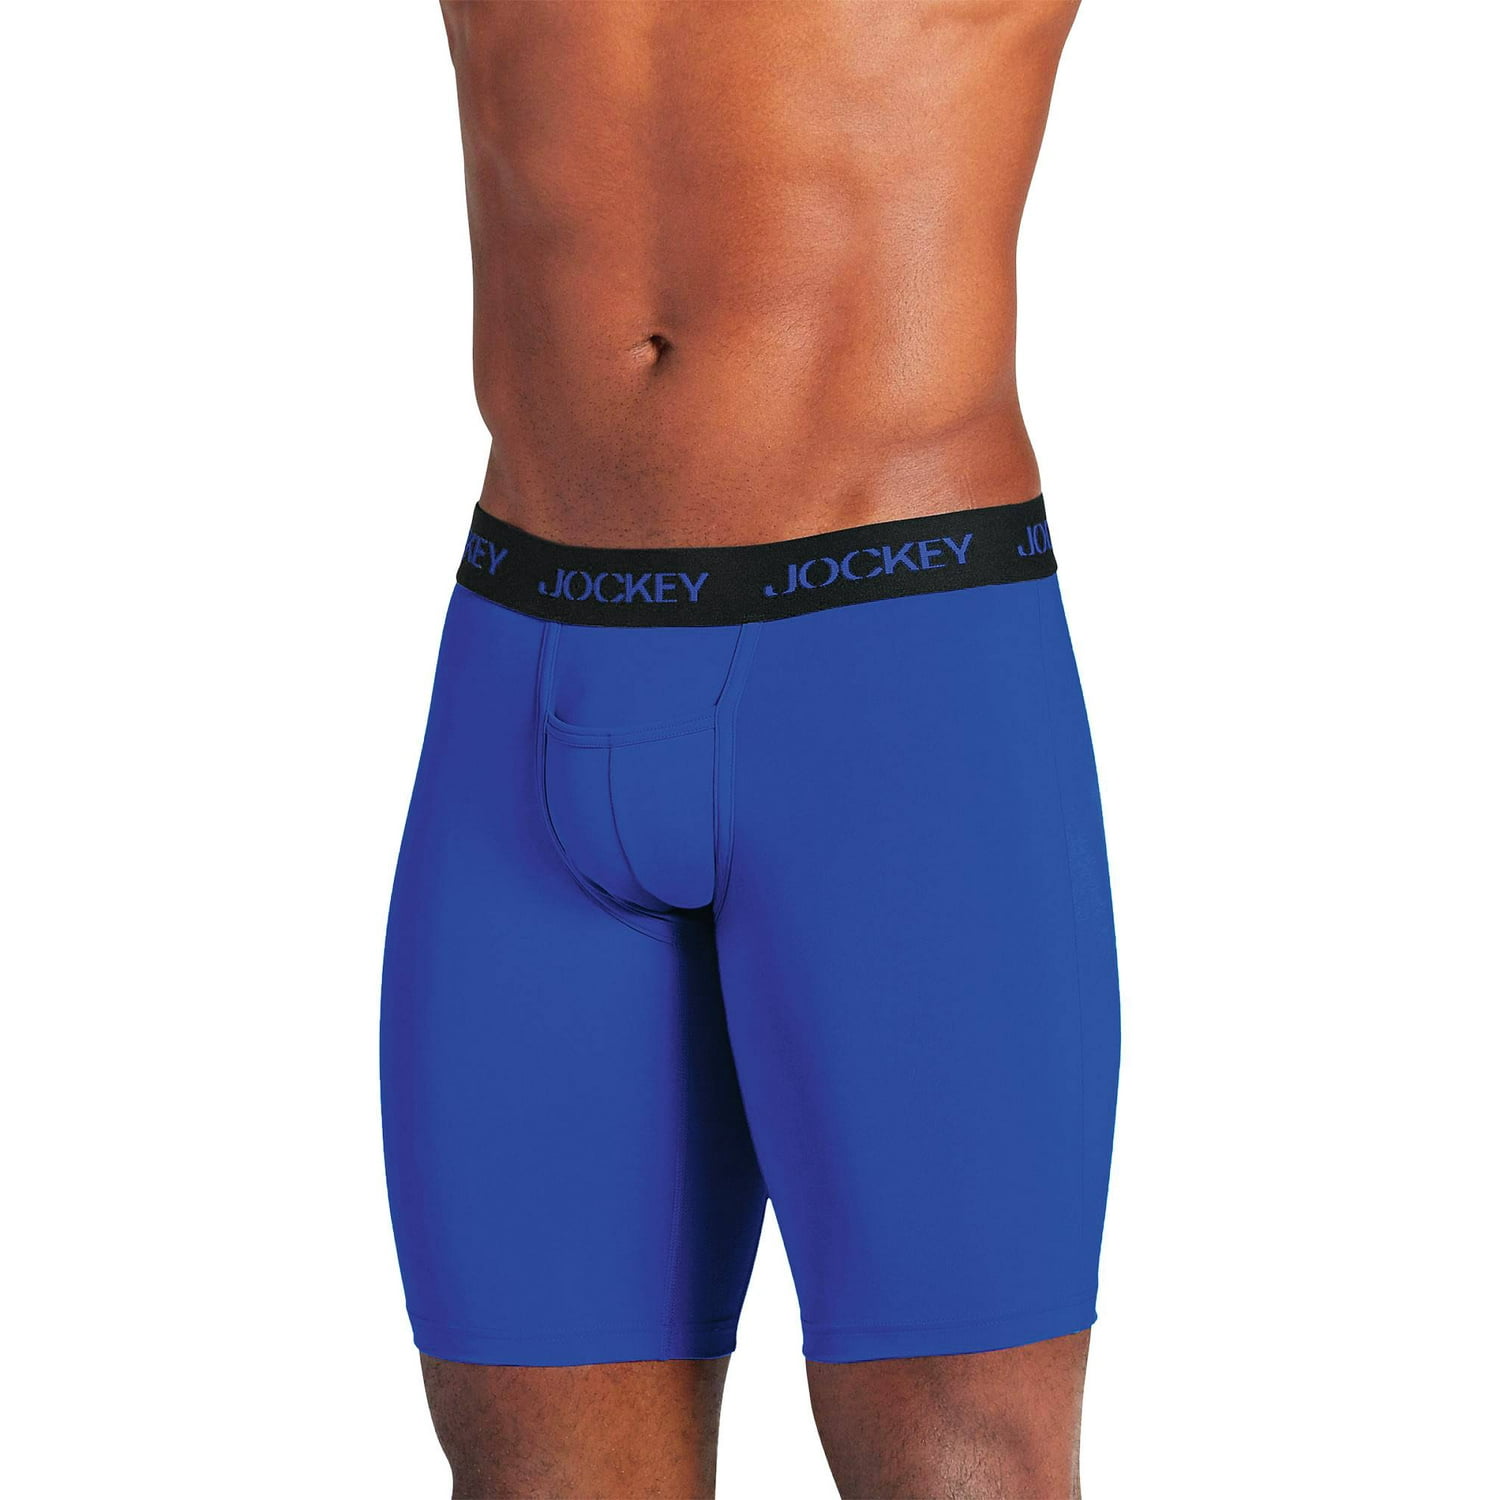 Jockey Men's Sport Microfiber 10" Midway Brief (Outrageous Blue) $3.99 + Free Shipping